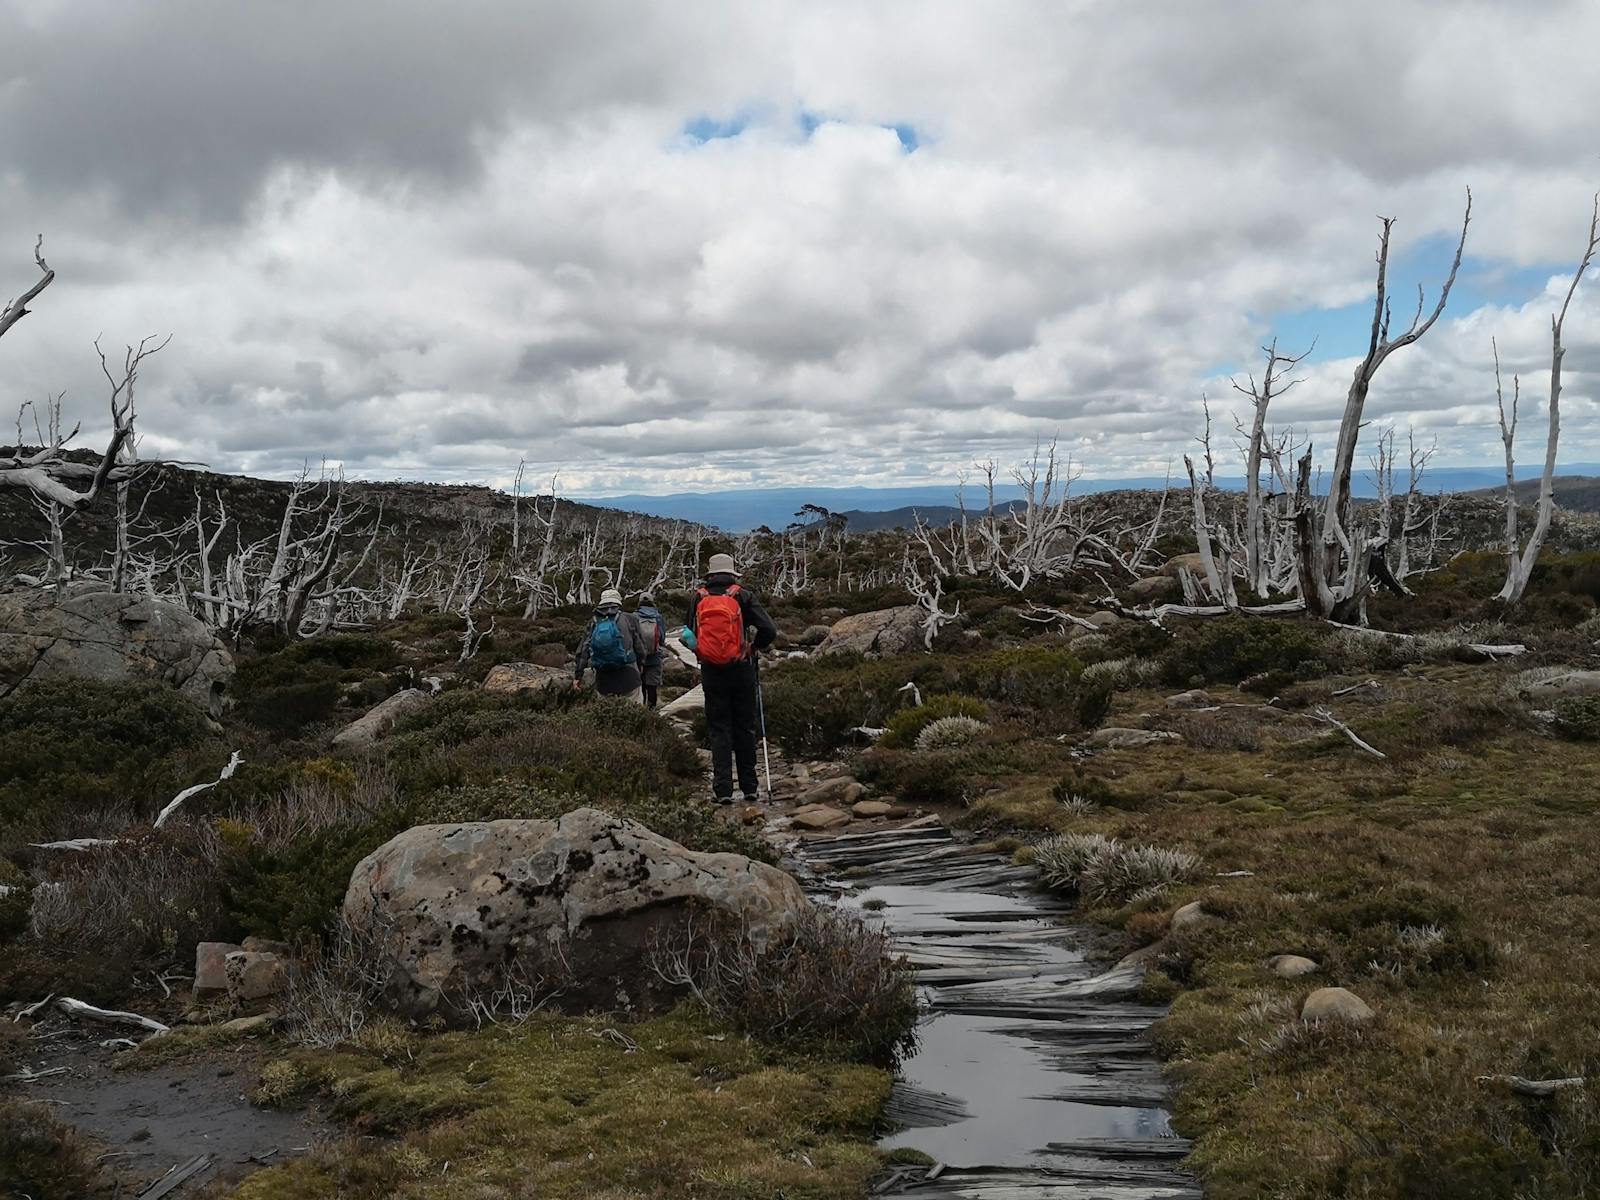 Mount Field on the Lake Pedder & South West Wilderness Pack-Free Walk by Life's An Adventure